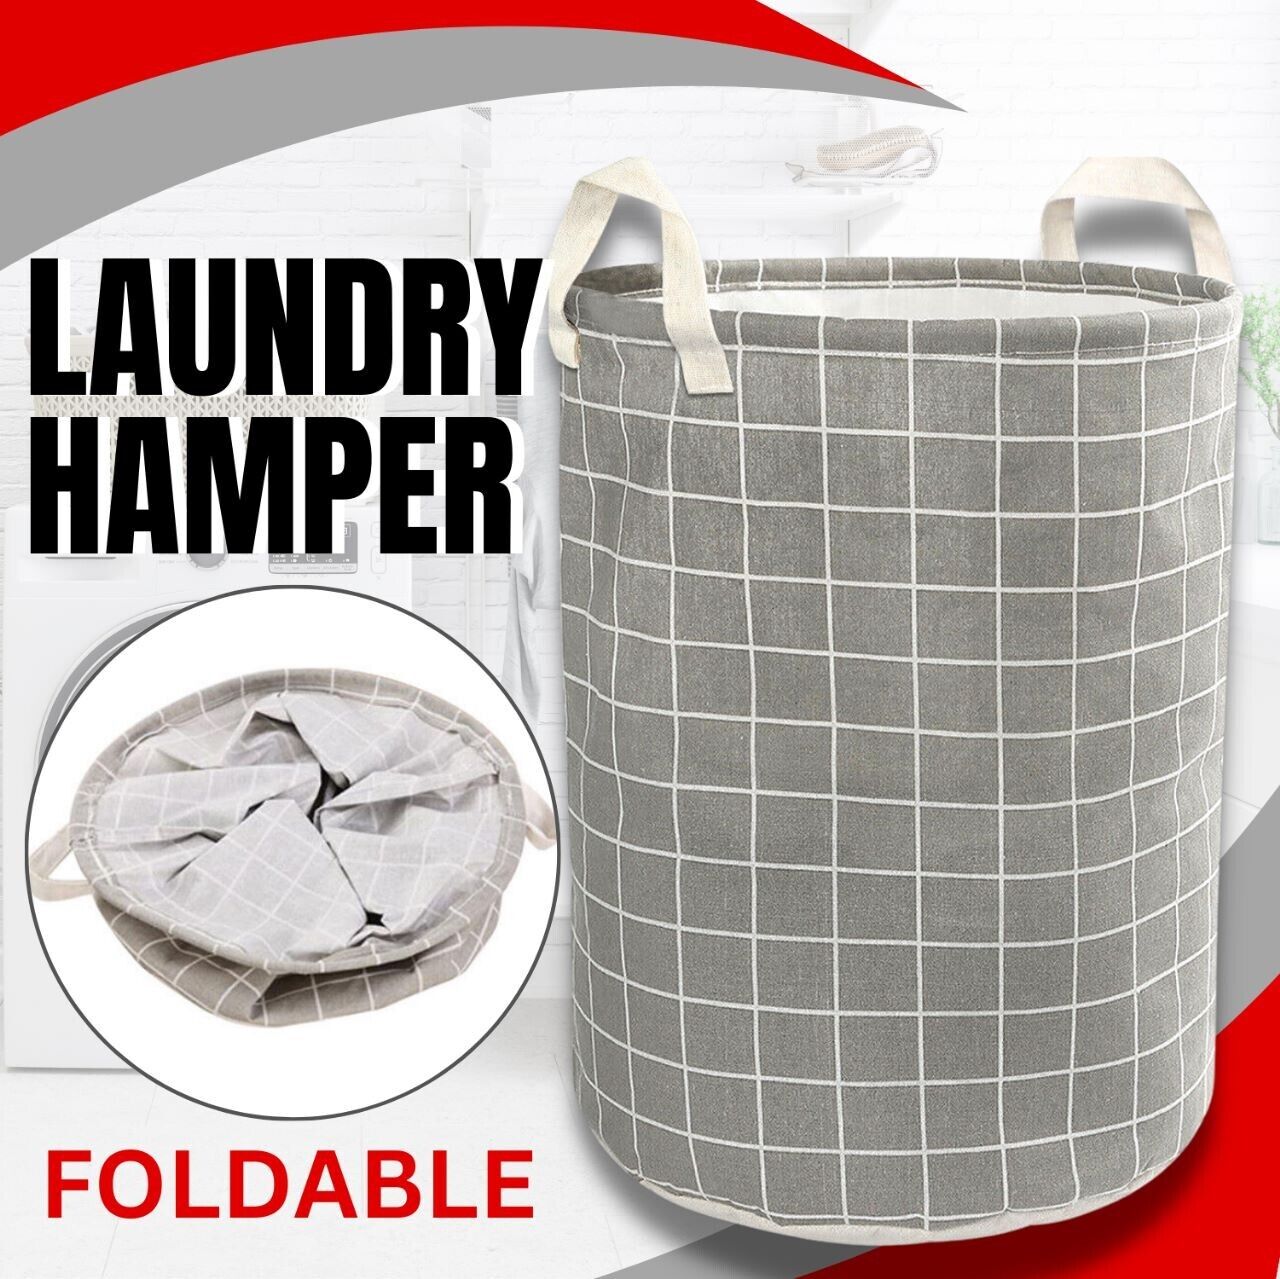 Collapsible laundry basket foldable